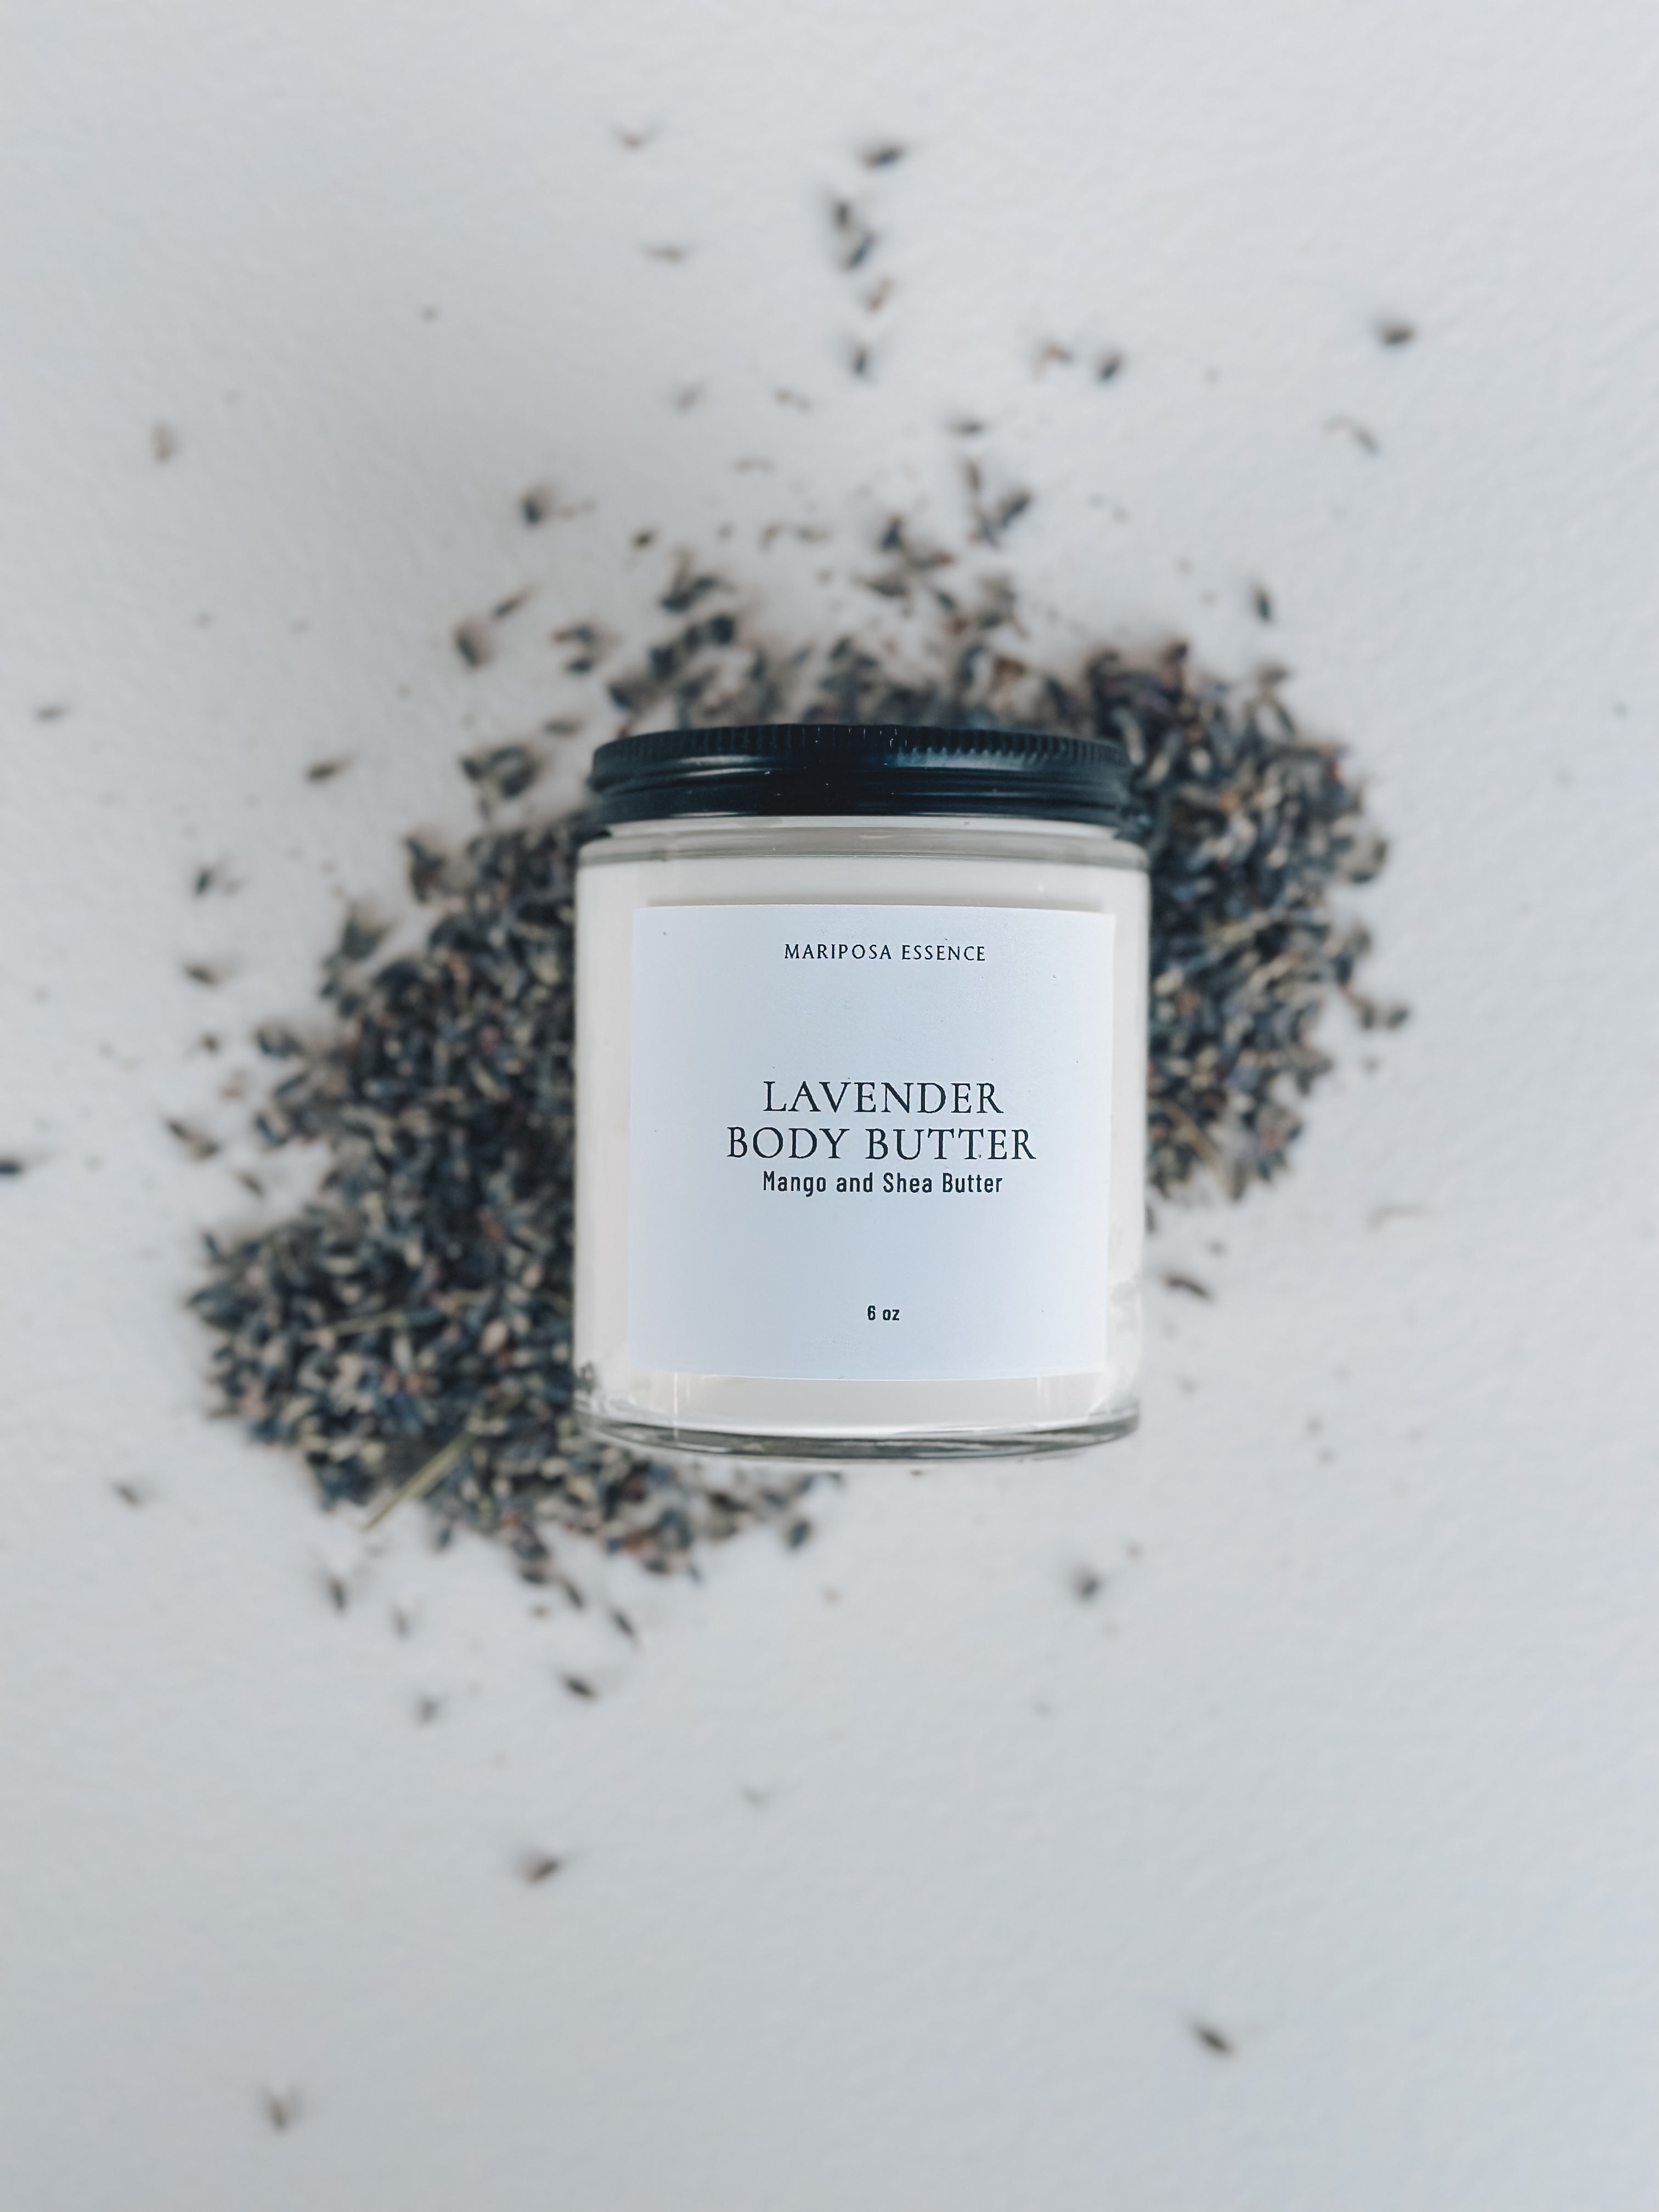 Lavender Body Butter displayed with Lavender buds